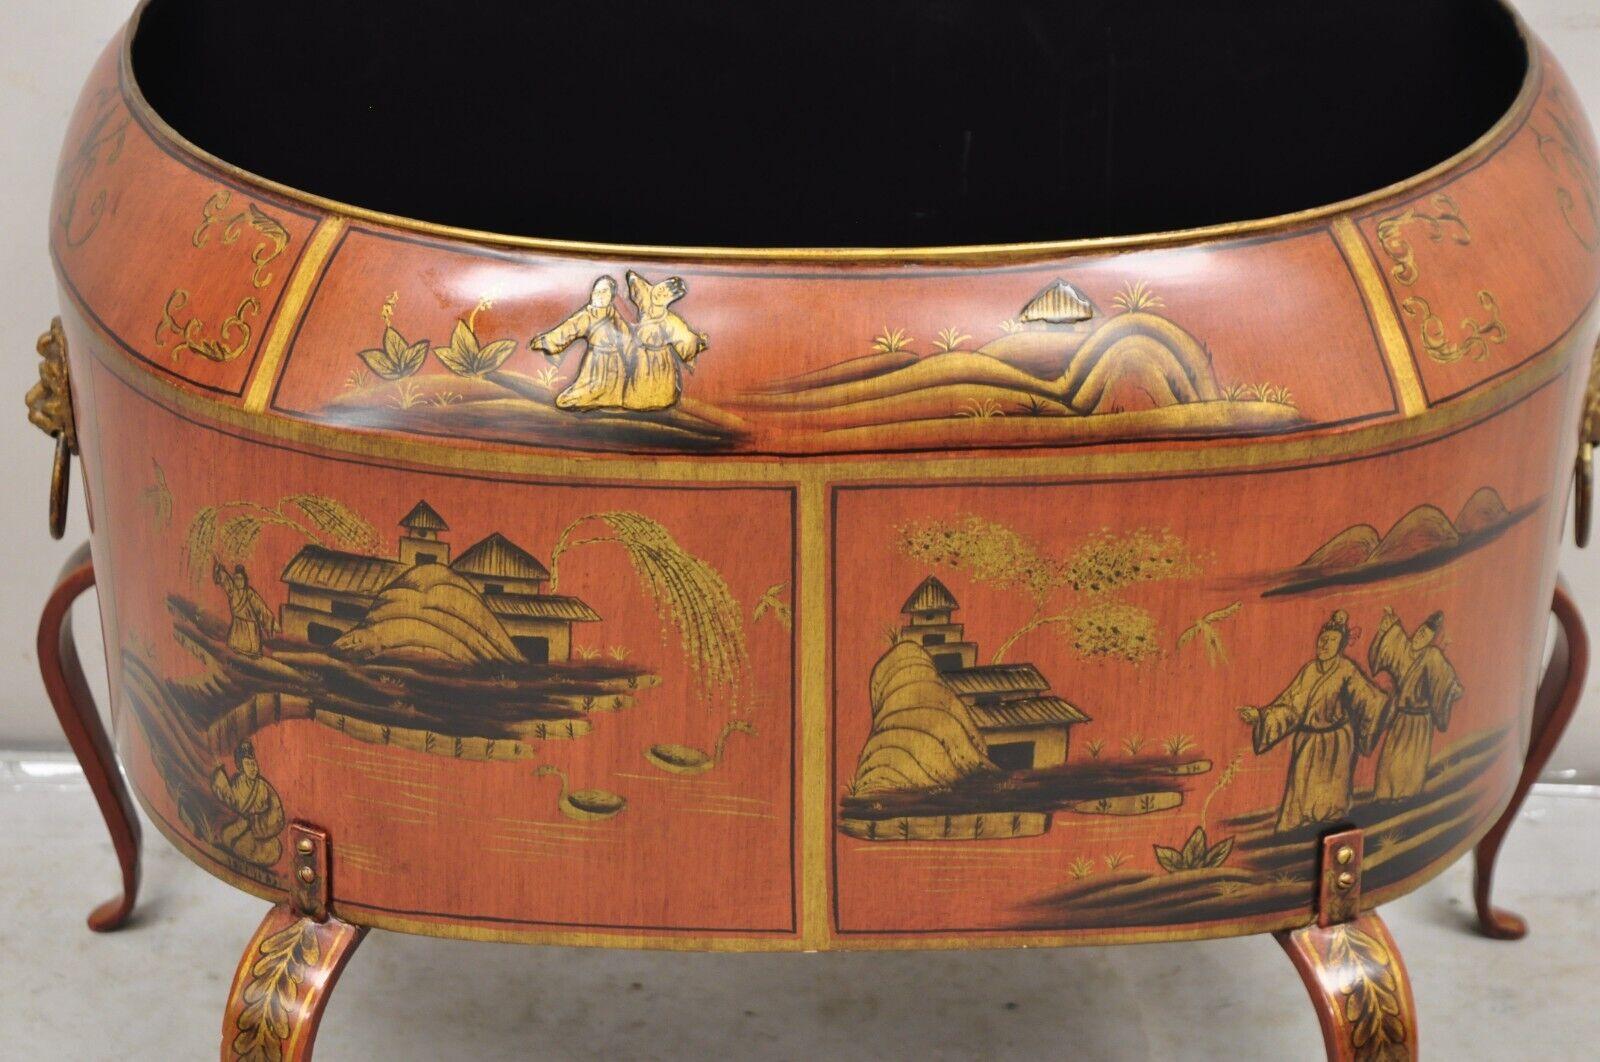 Italian Red Tole Chinoiserie Gilt Decorated Floor Jardiniere Planter In Good Condition For Sale In Philadelphia, PA